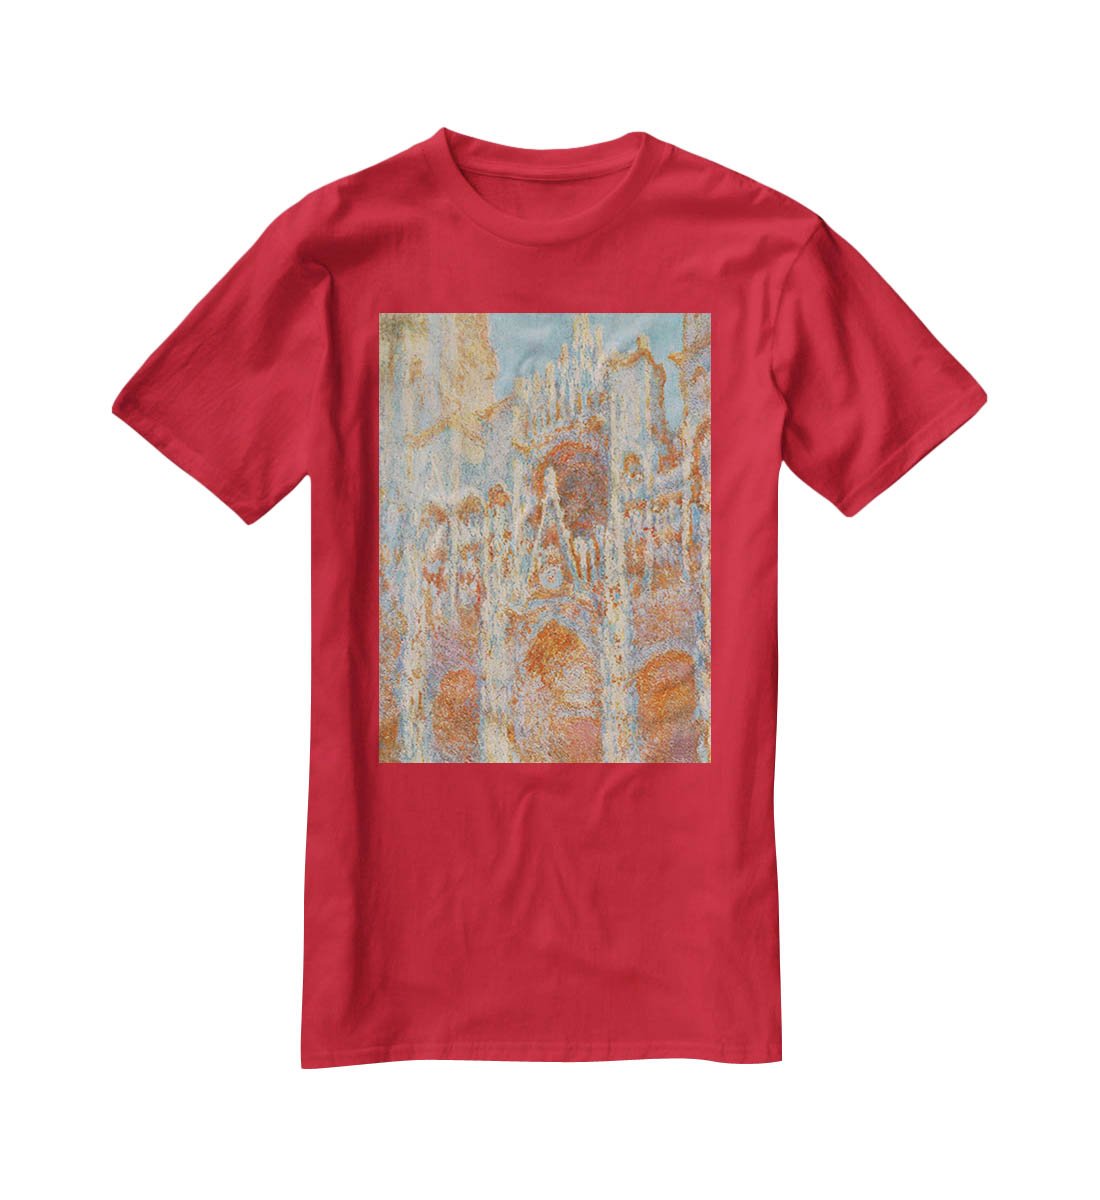 The Rouen Cathedral The facade at sunset by Monet T-Shirt - Canvas Art Rocks - 4